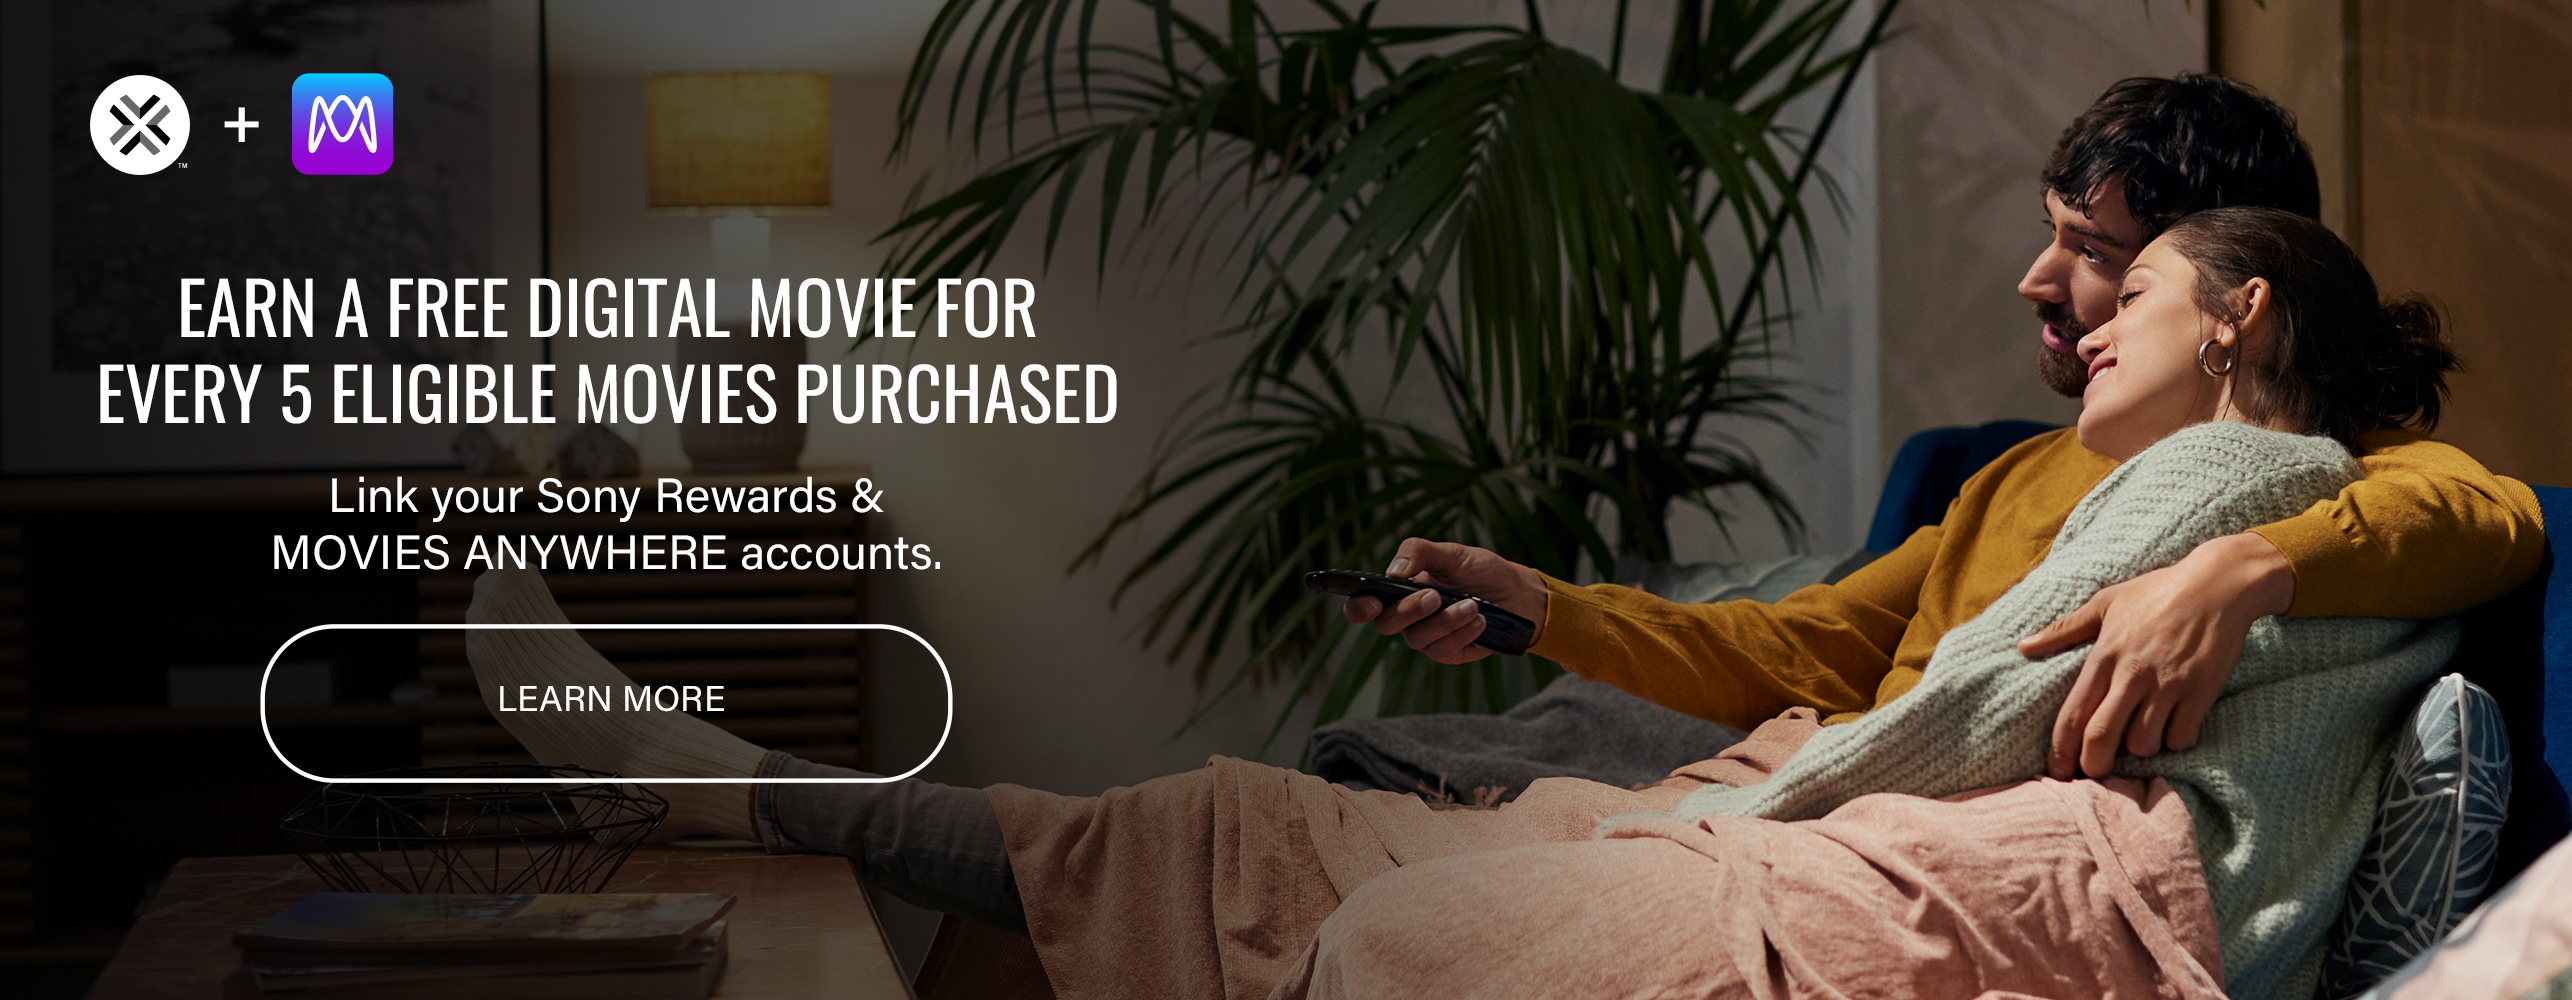 Earn a Free Digital Movie for Every 5 Eligible Movies Purchased. Link Your Sony Rewards And Movies Anywhere accounts. Learn More